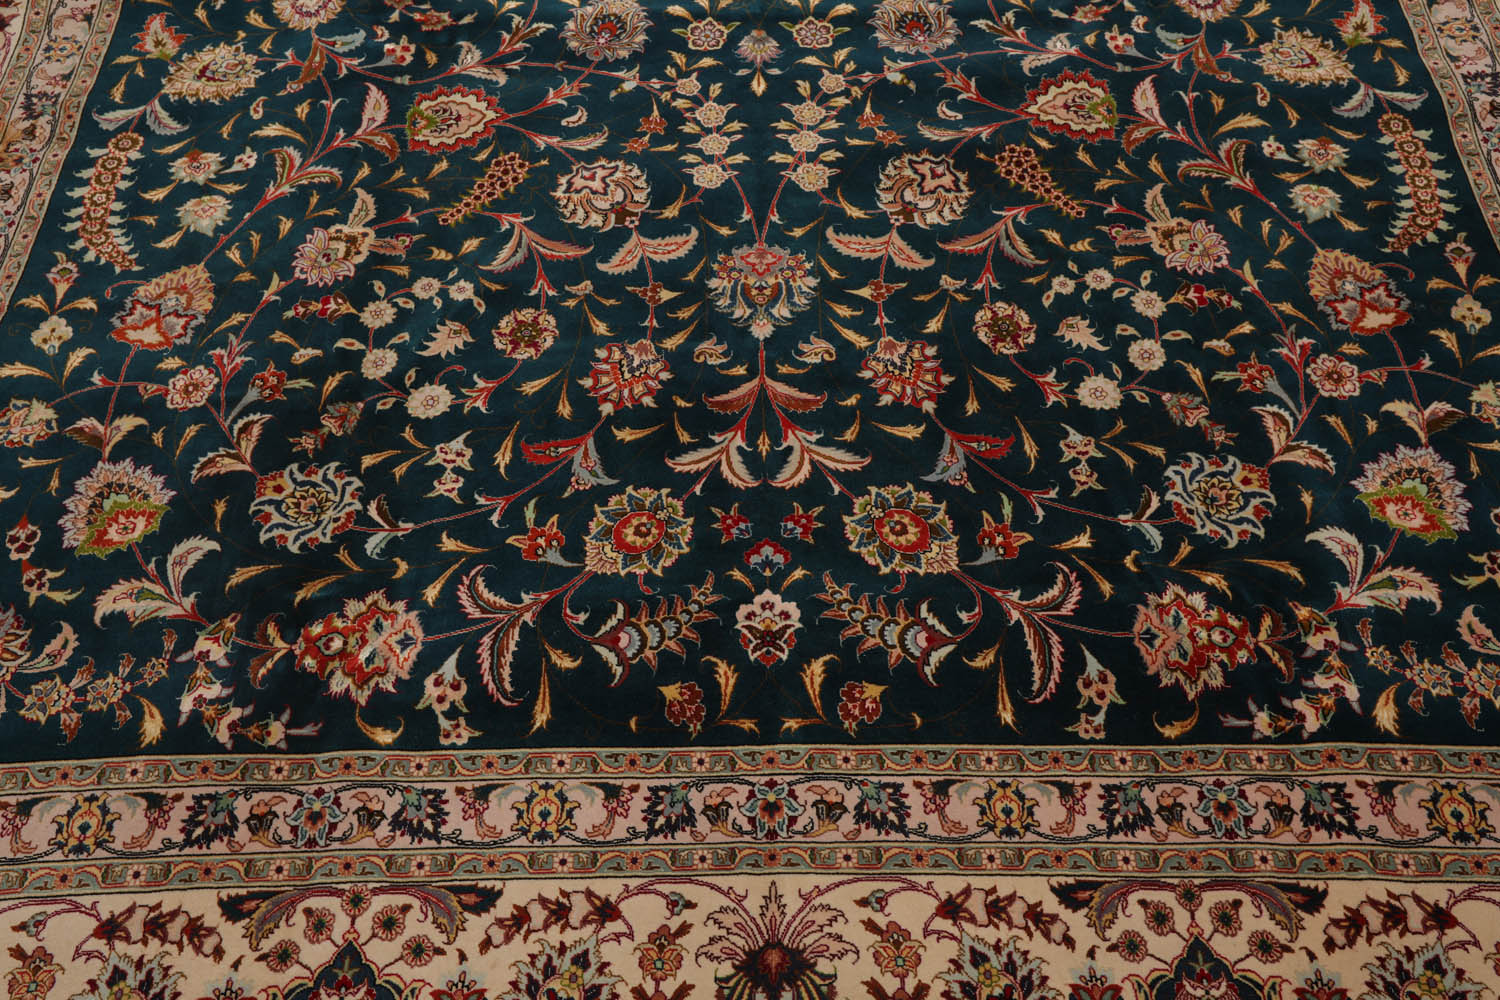 Birgit 10x14 Hand Knotted Wool and Silk Traditional Tabriz 400 KPSI Oriental Area Rug Teal, Beige Color